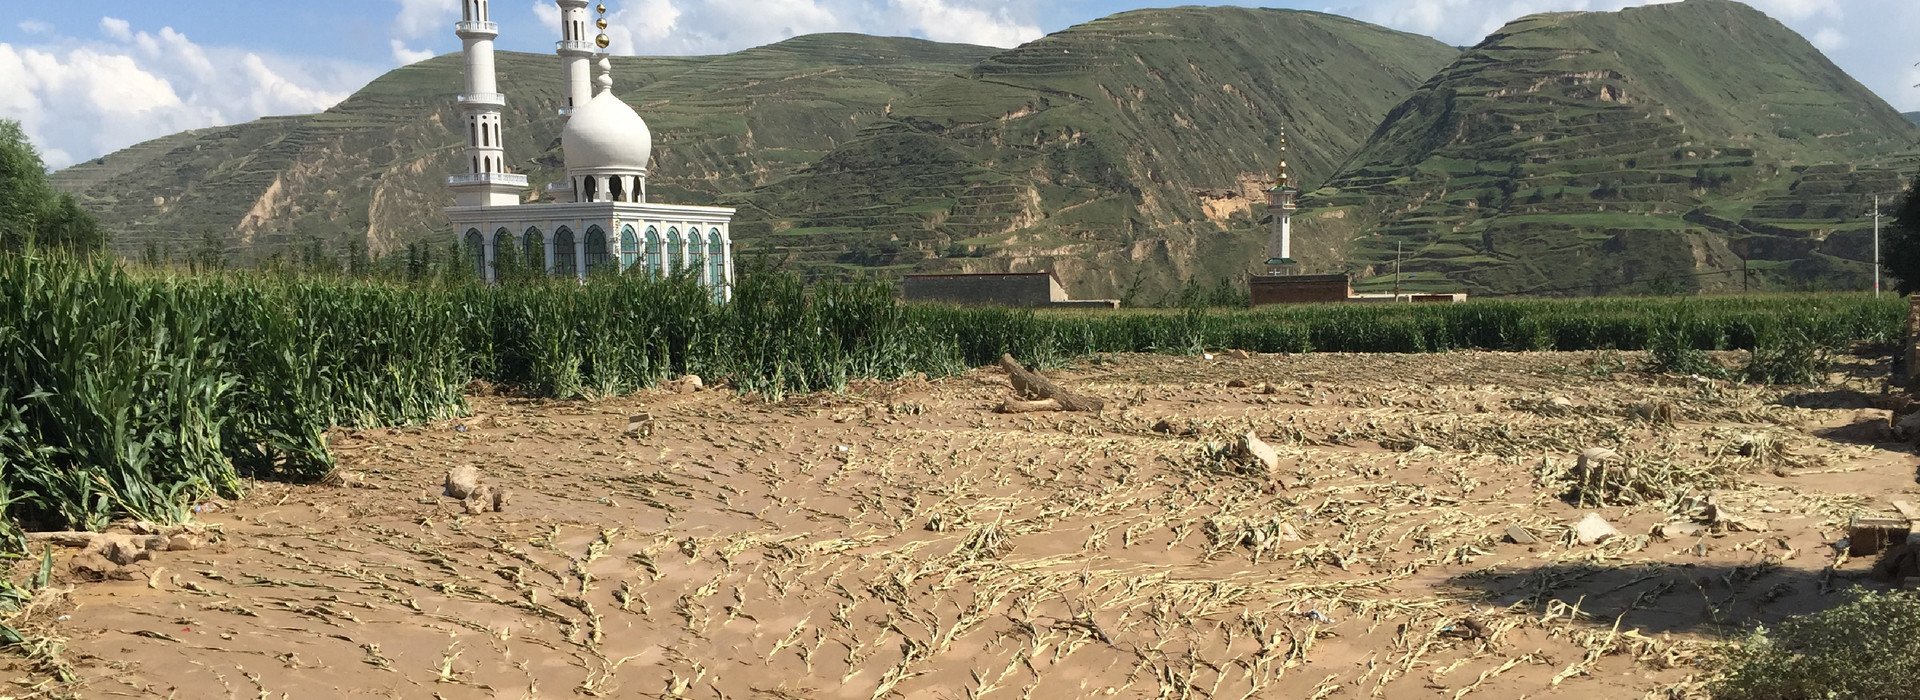 Crops severely damaged by floods in Chenhe Village, Guoyuan Township, Dongxiang County, Gansu Province.